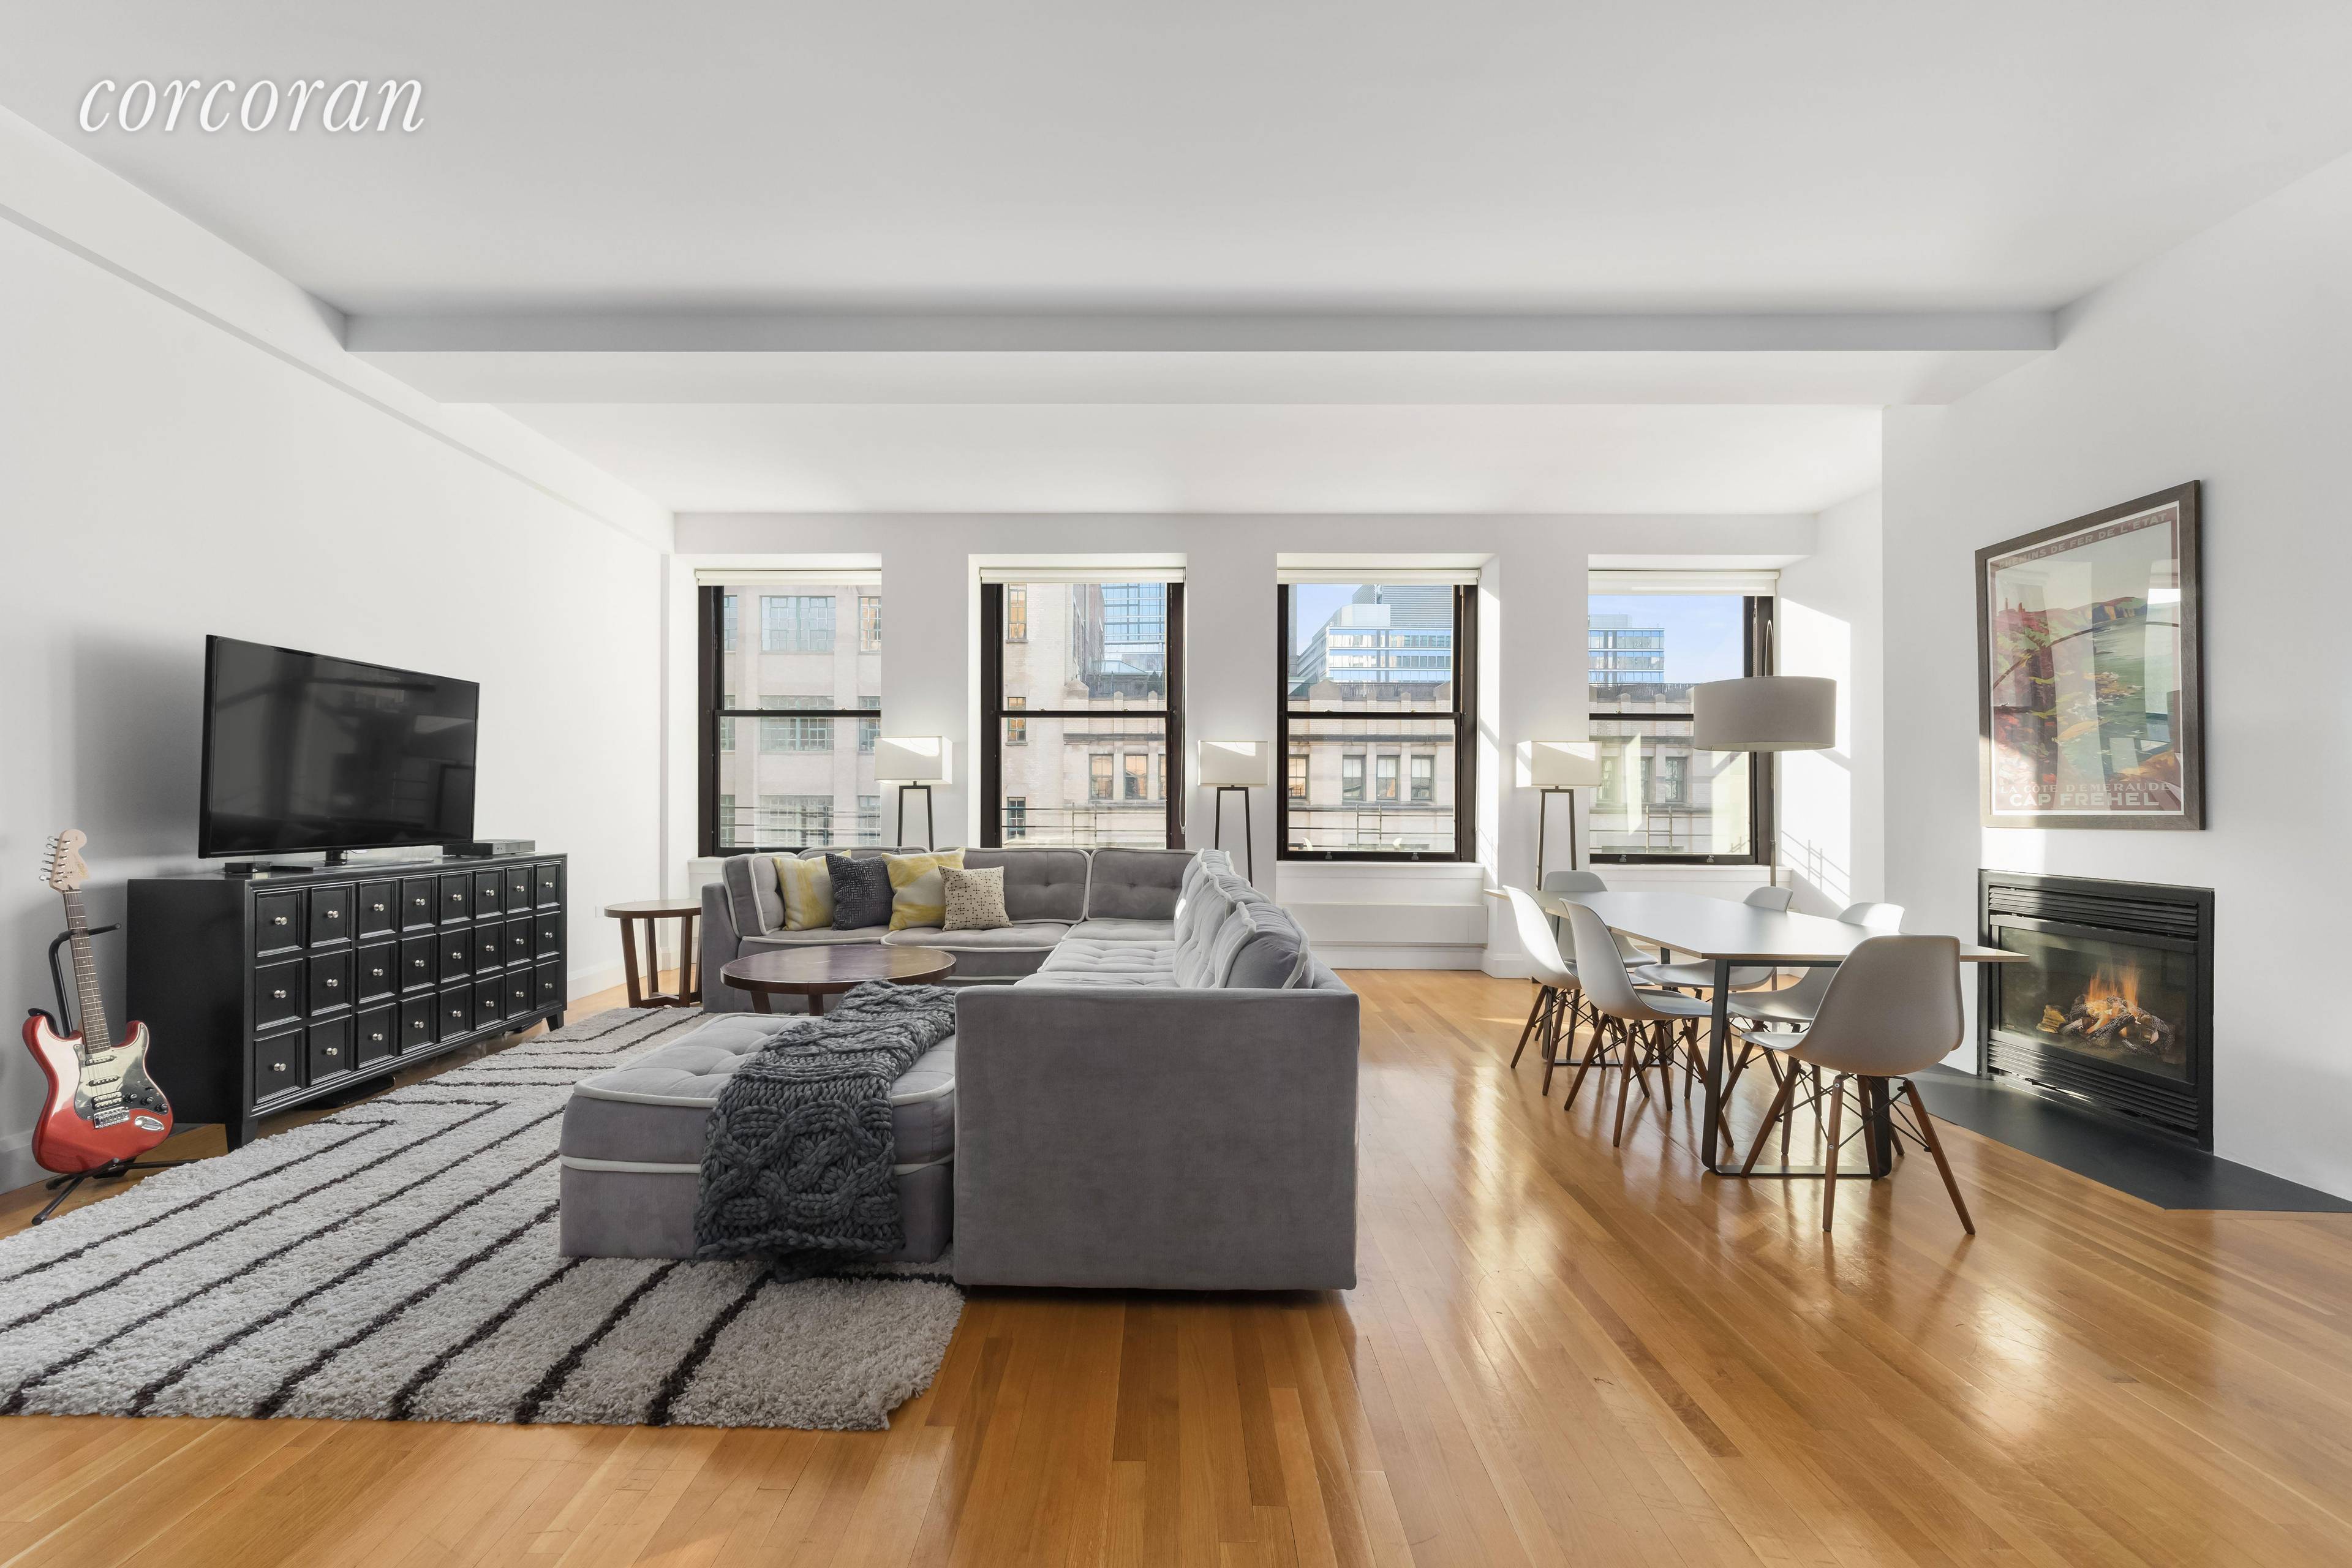 In the heart of Tribeca, this spacious and sunlit loft apartment features all the luxuries of a modern home in a full service boutique condominium.